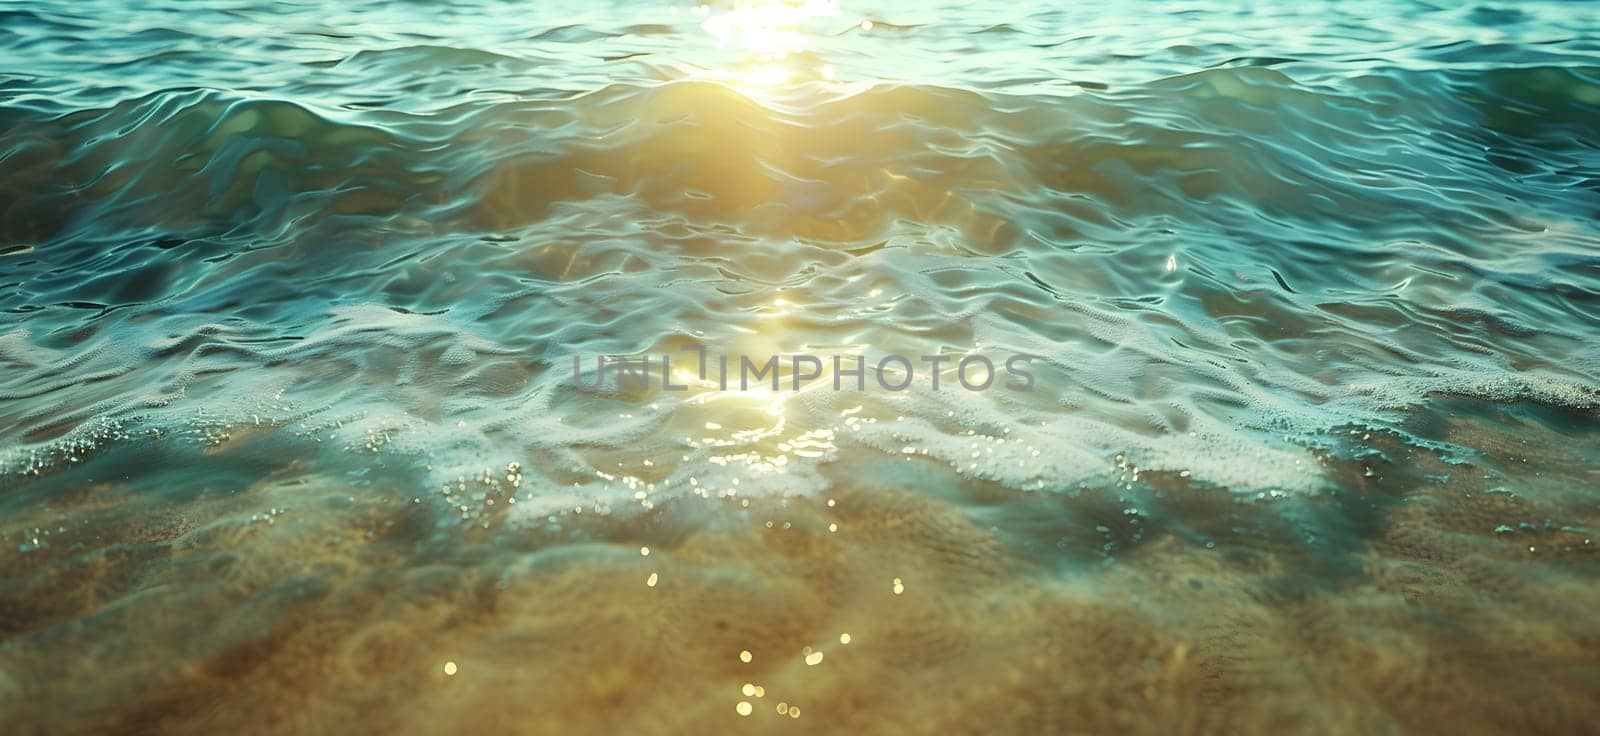 Sunlight illuminates the ocean waves, creating a beautiful fluid landscape by Nadtochiy